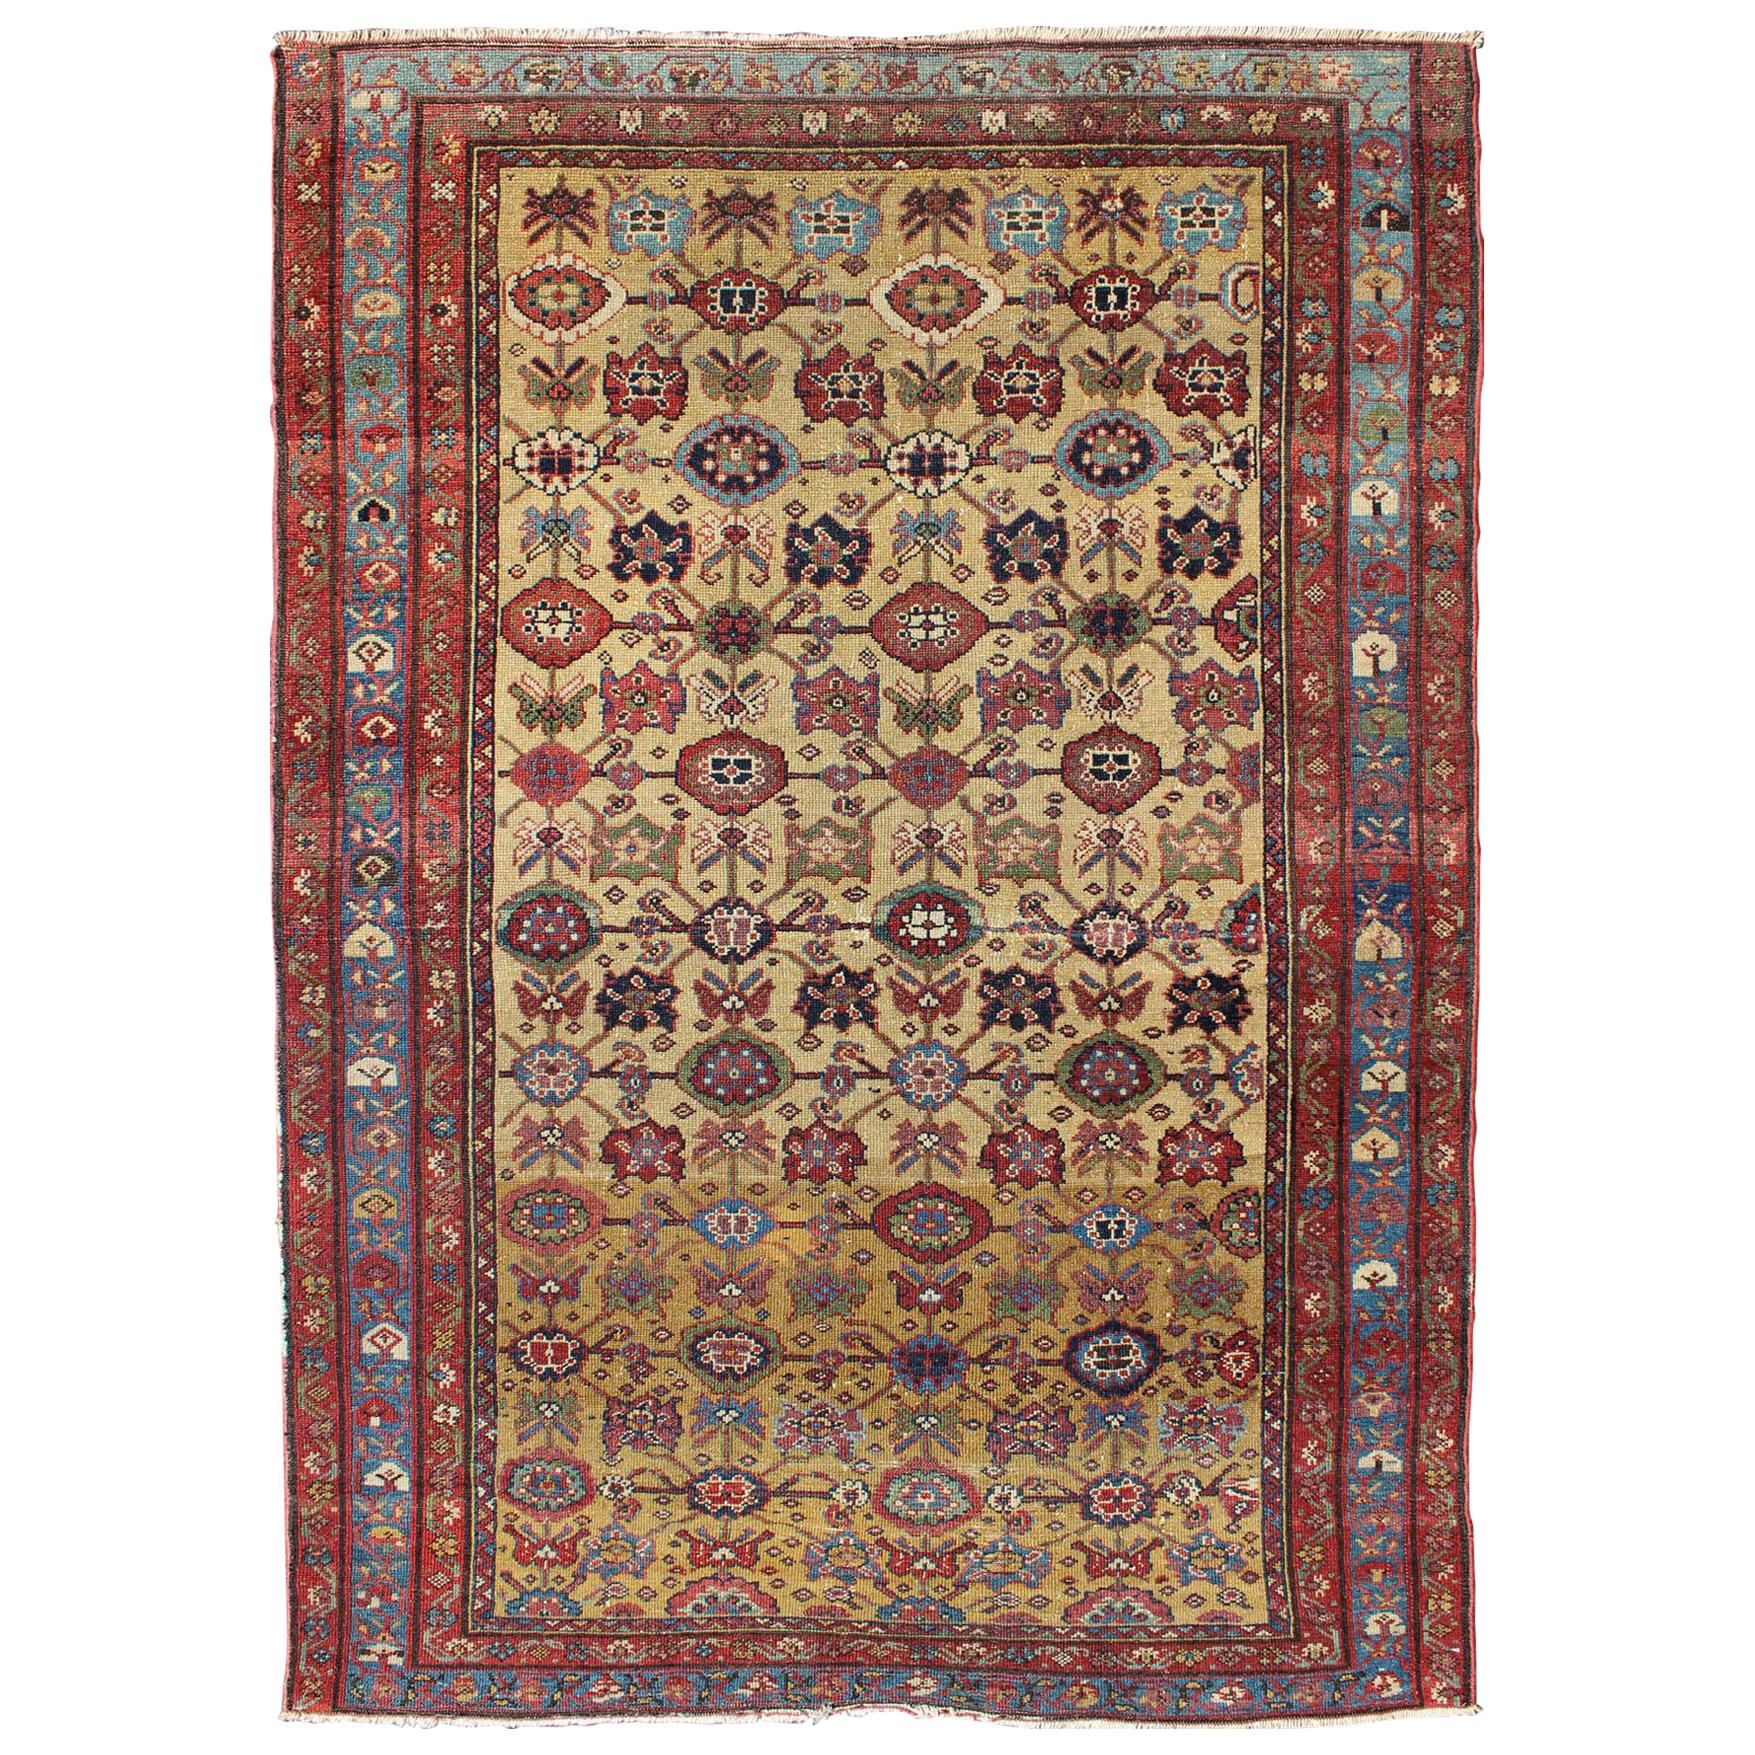 All Over Geometric Antique Persian Malayer Rug in Yellow, Red, Blue, Green